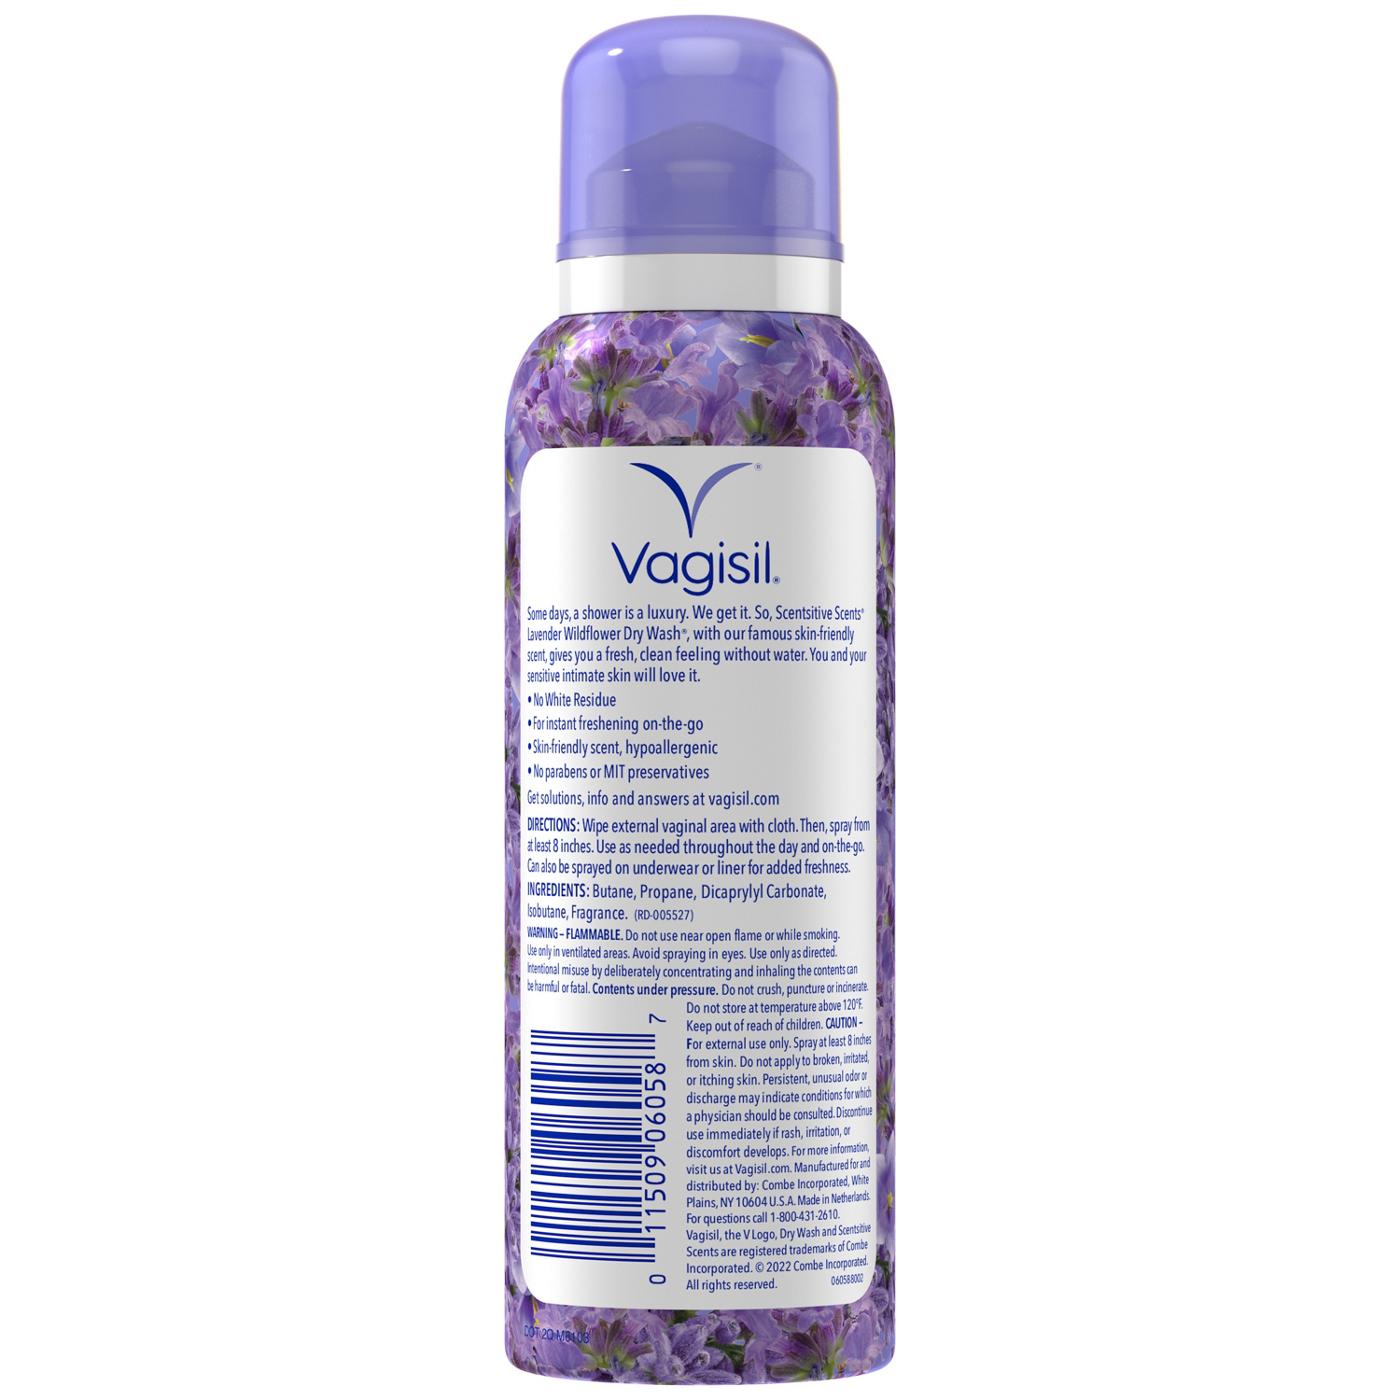 Vagisil Scentsitive Scents Dry Wash - Lavender Wildflower; image 2 of 2